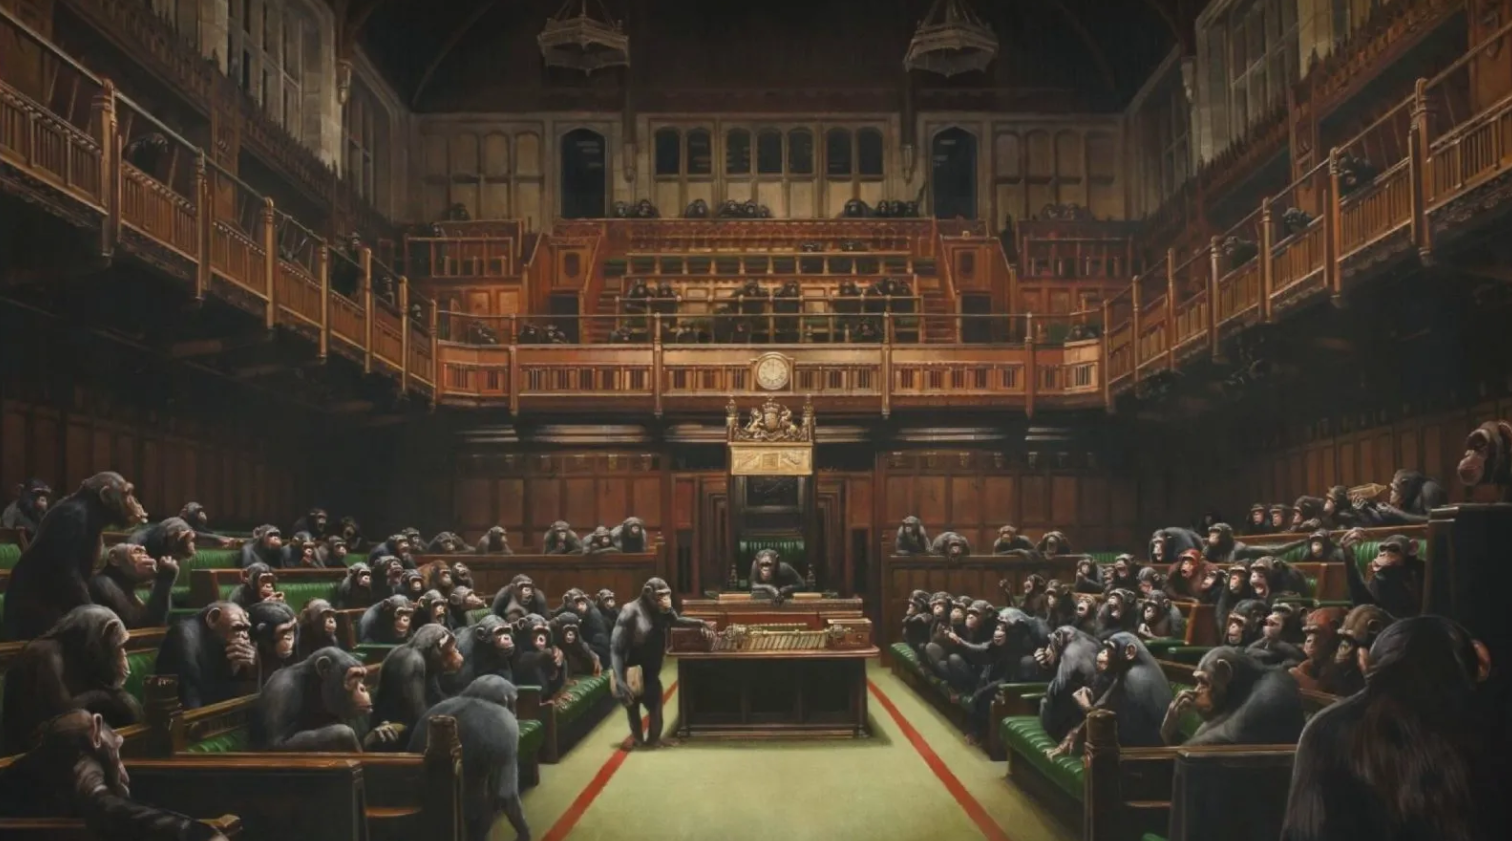 Banksy's artwork depicts chimpanzees in the House of Commons in the UK. Source: Prestige Hong Kong